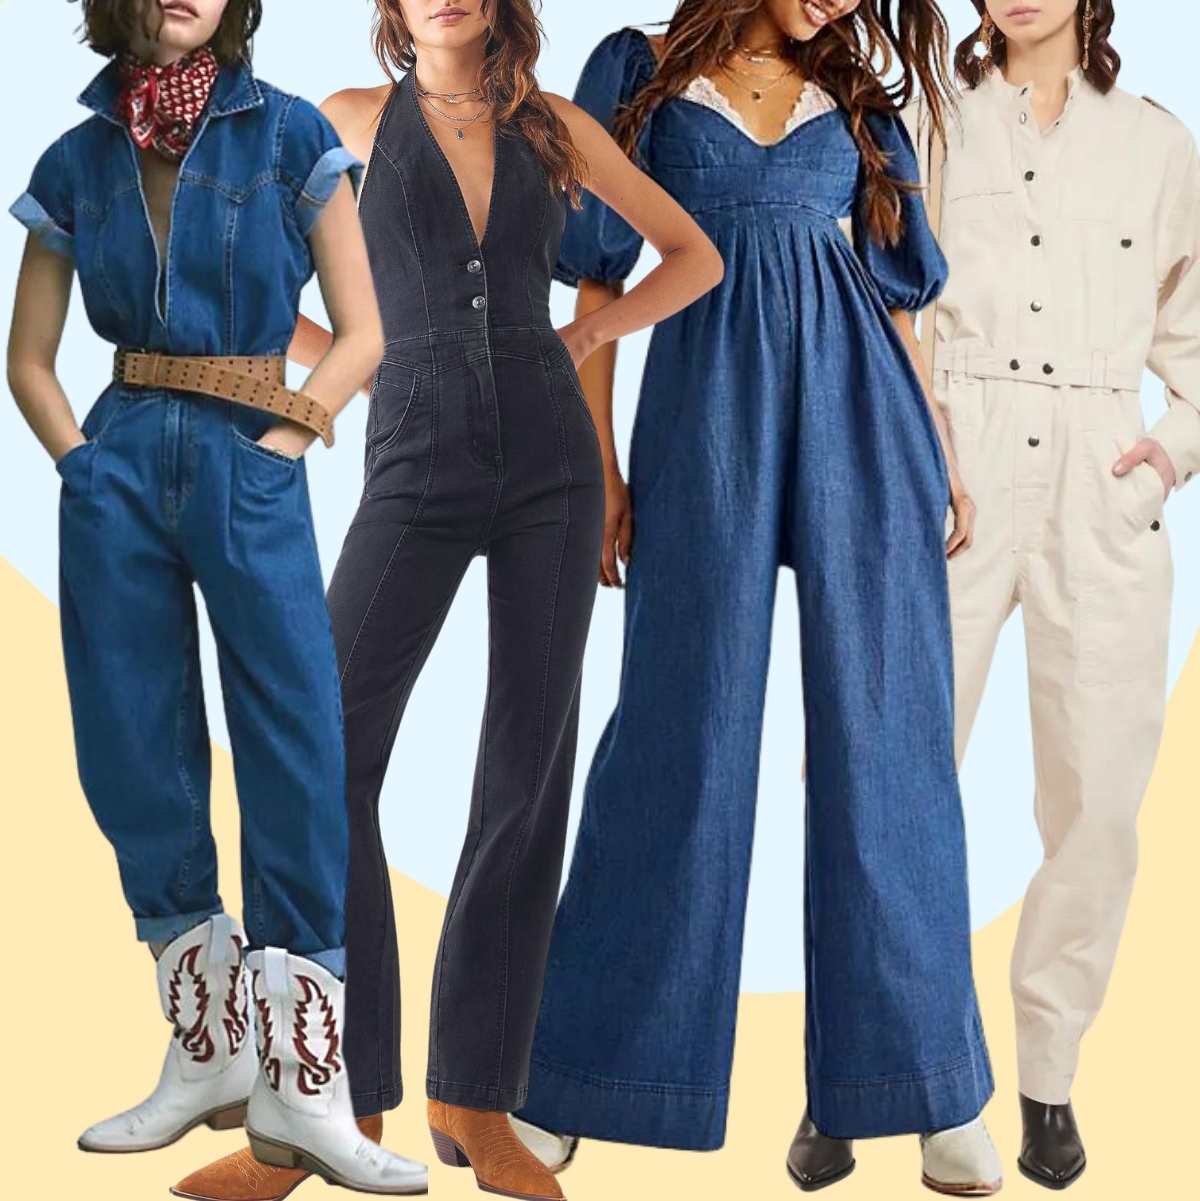 Collage of 5 women wearing different cowboy boots outfits with jumpsuits.